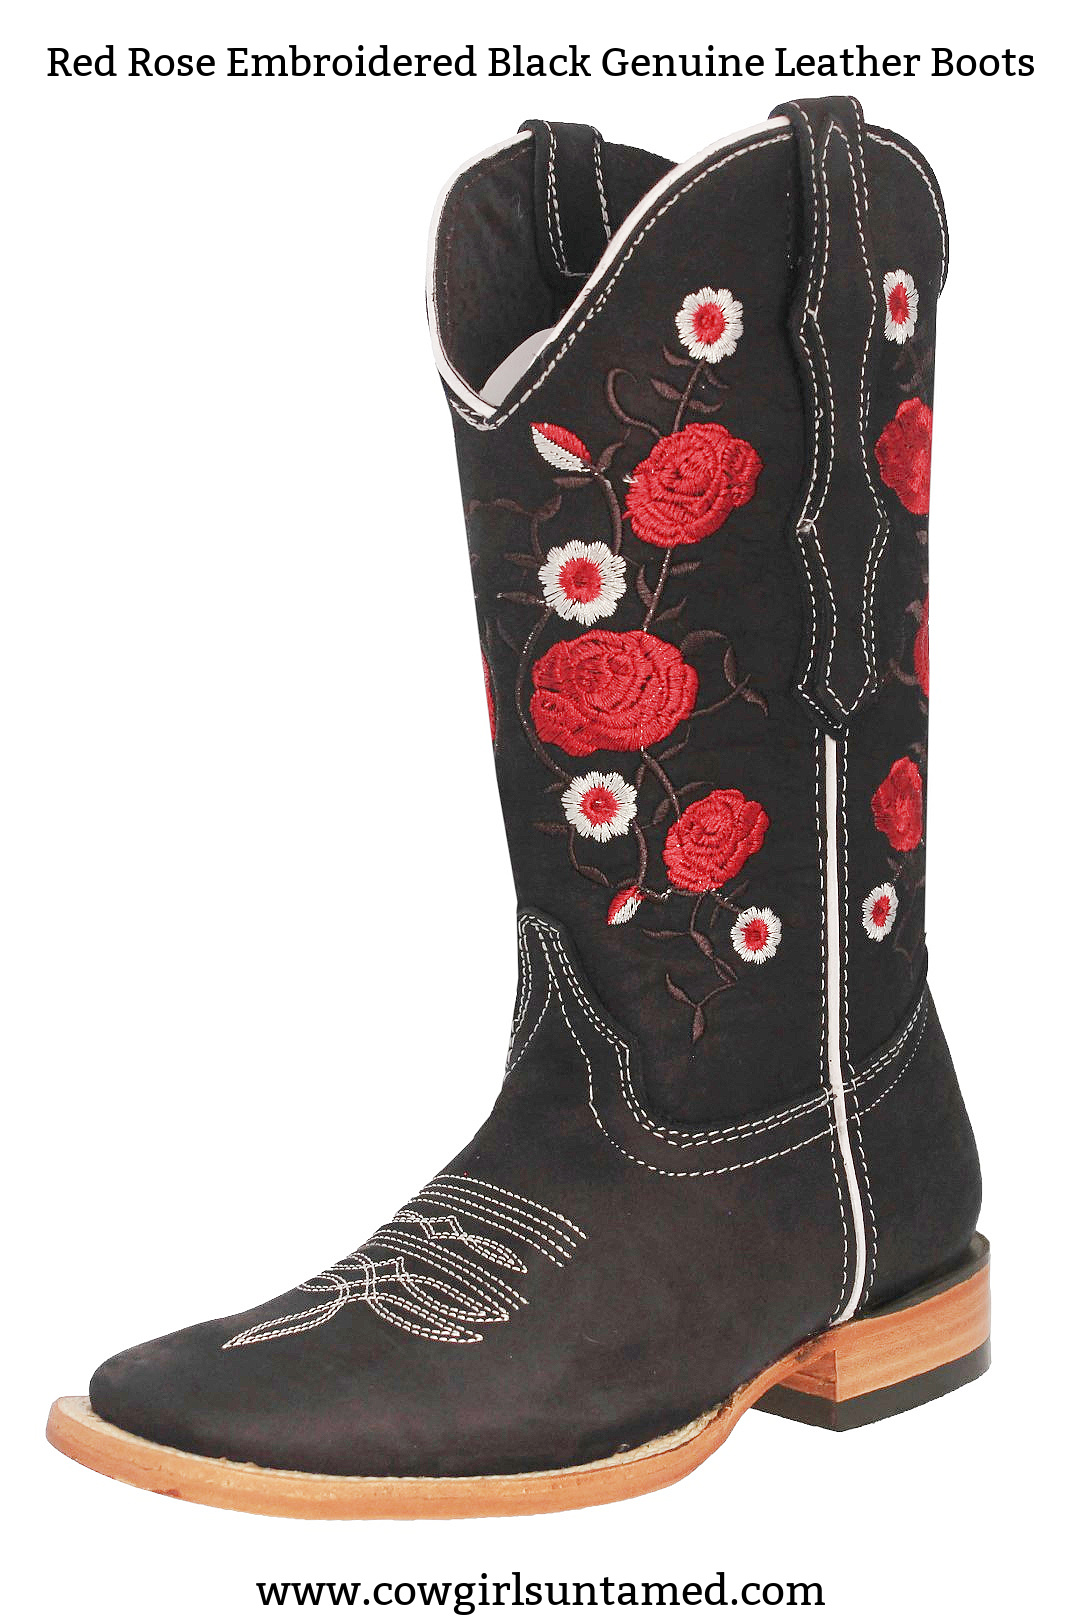 THE RED ROSE BOOT Red White Embroidered  Floral Black Genuine Leather Square Toe Cowgirl Boots 6-10